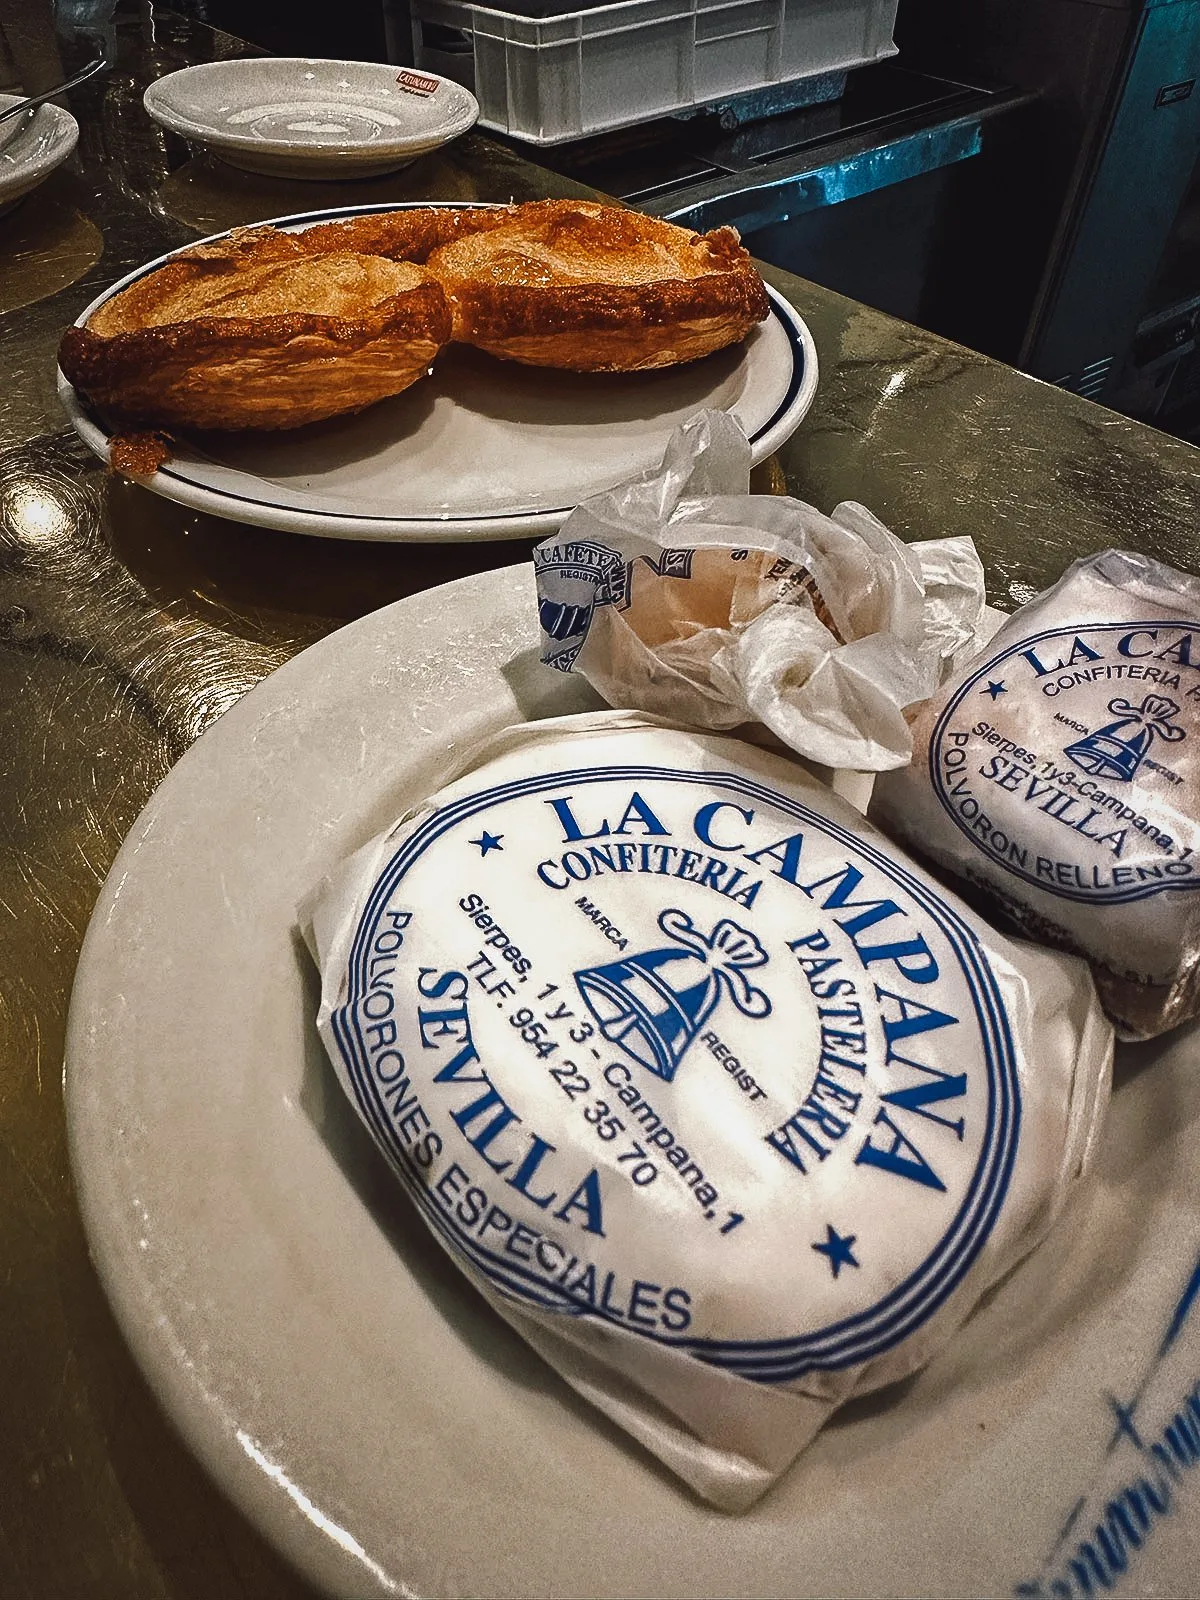 Traditional Spanish confections at a restaurant in Seville